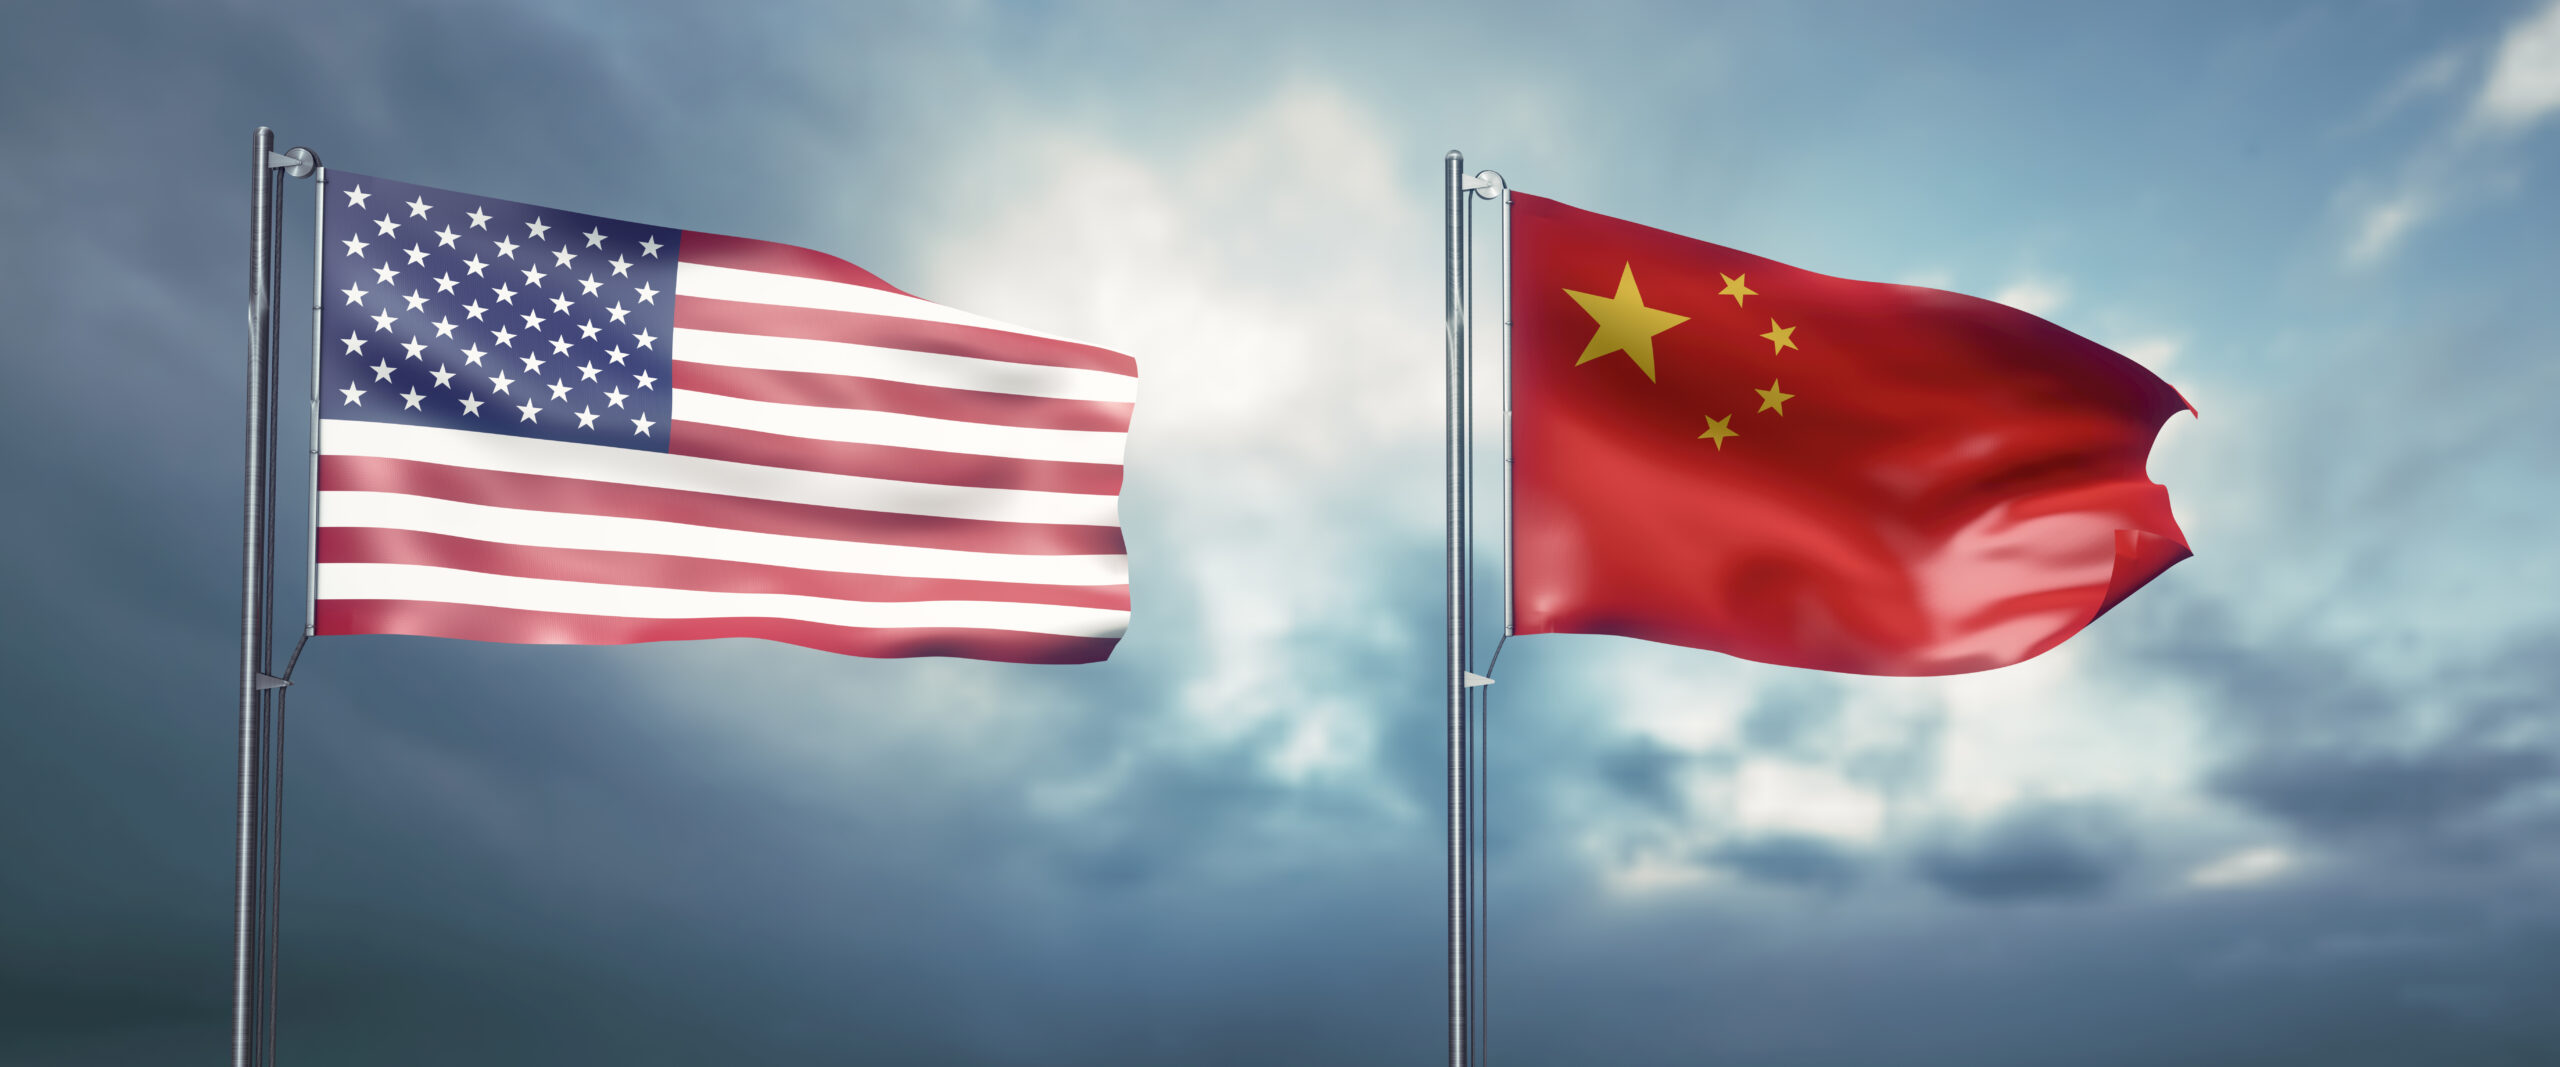 US Flag and Republic of China Flag